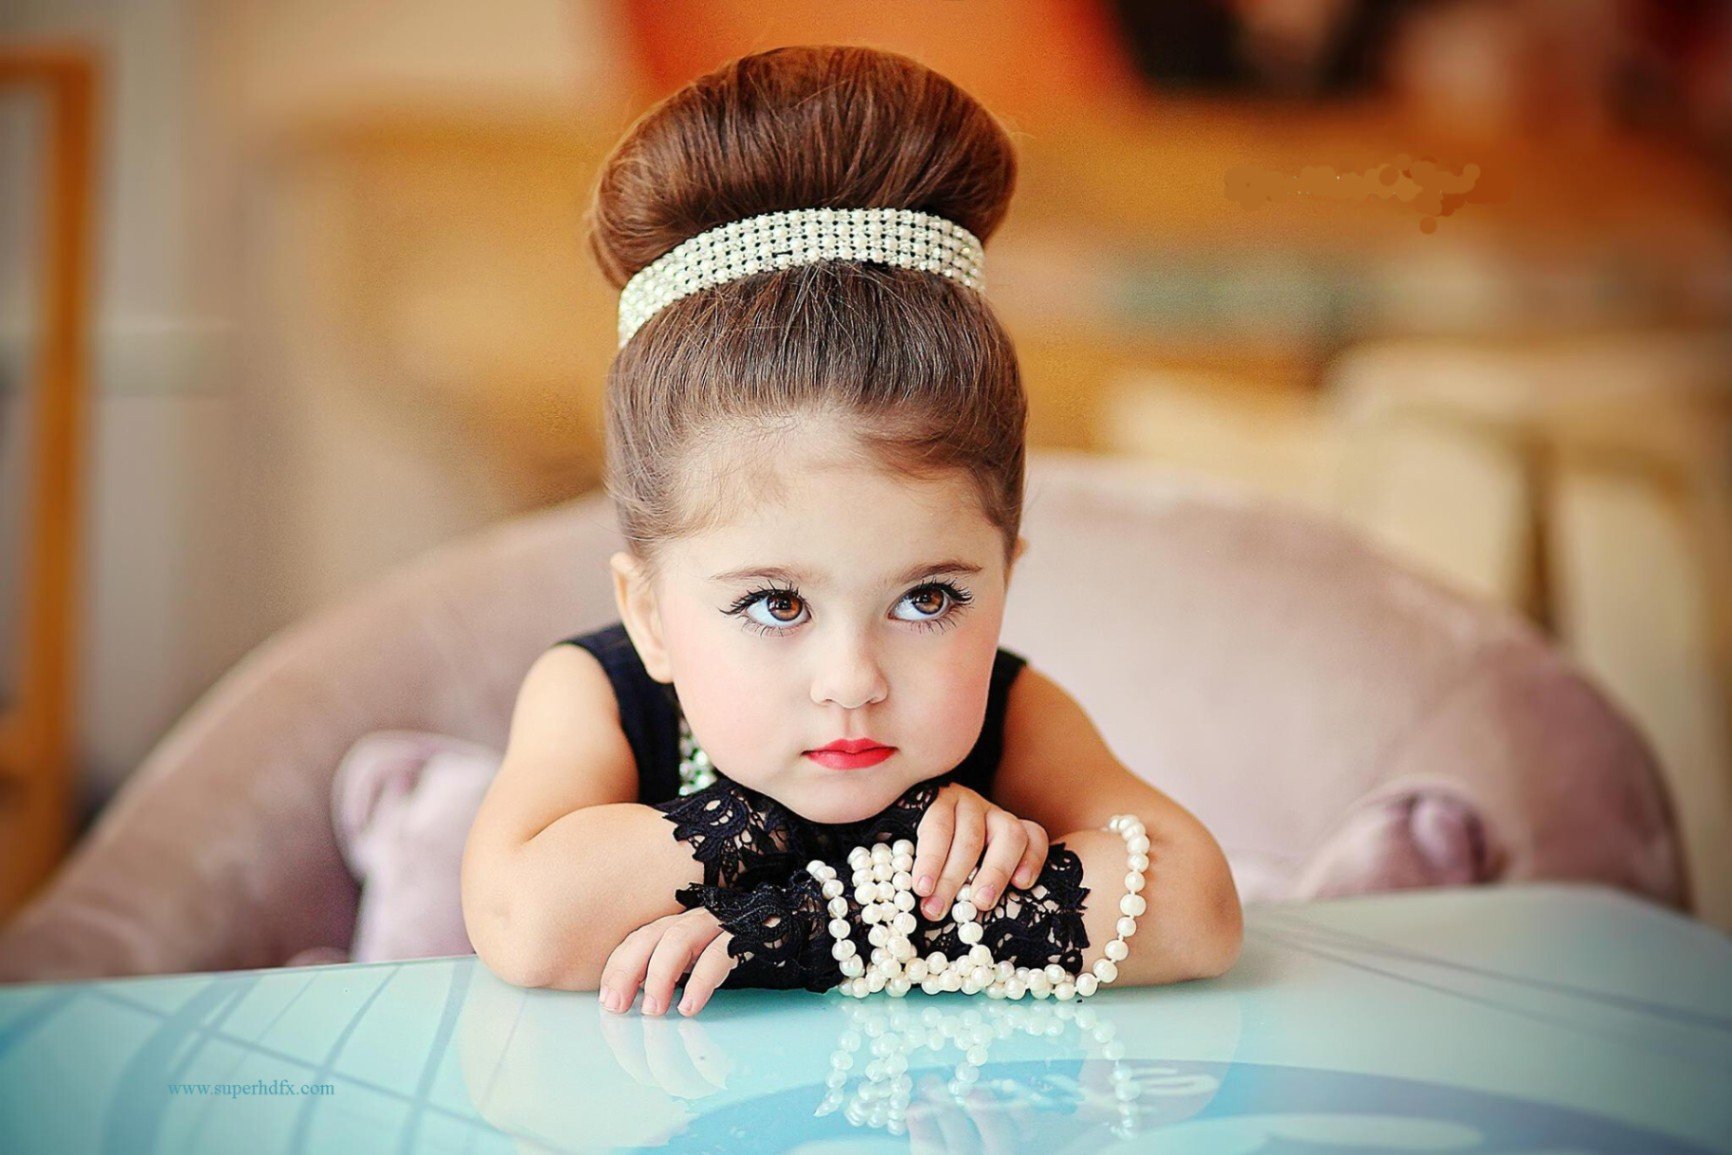 50 Most Used Girl Names in the World - Get Inspired By These Names